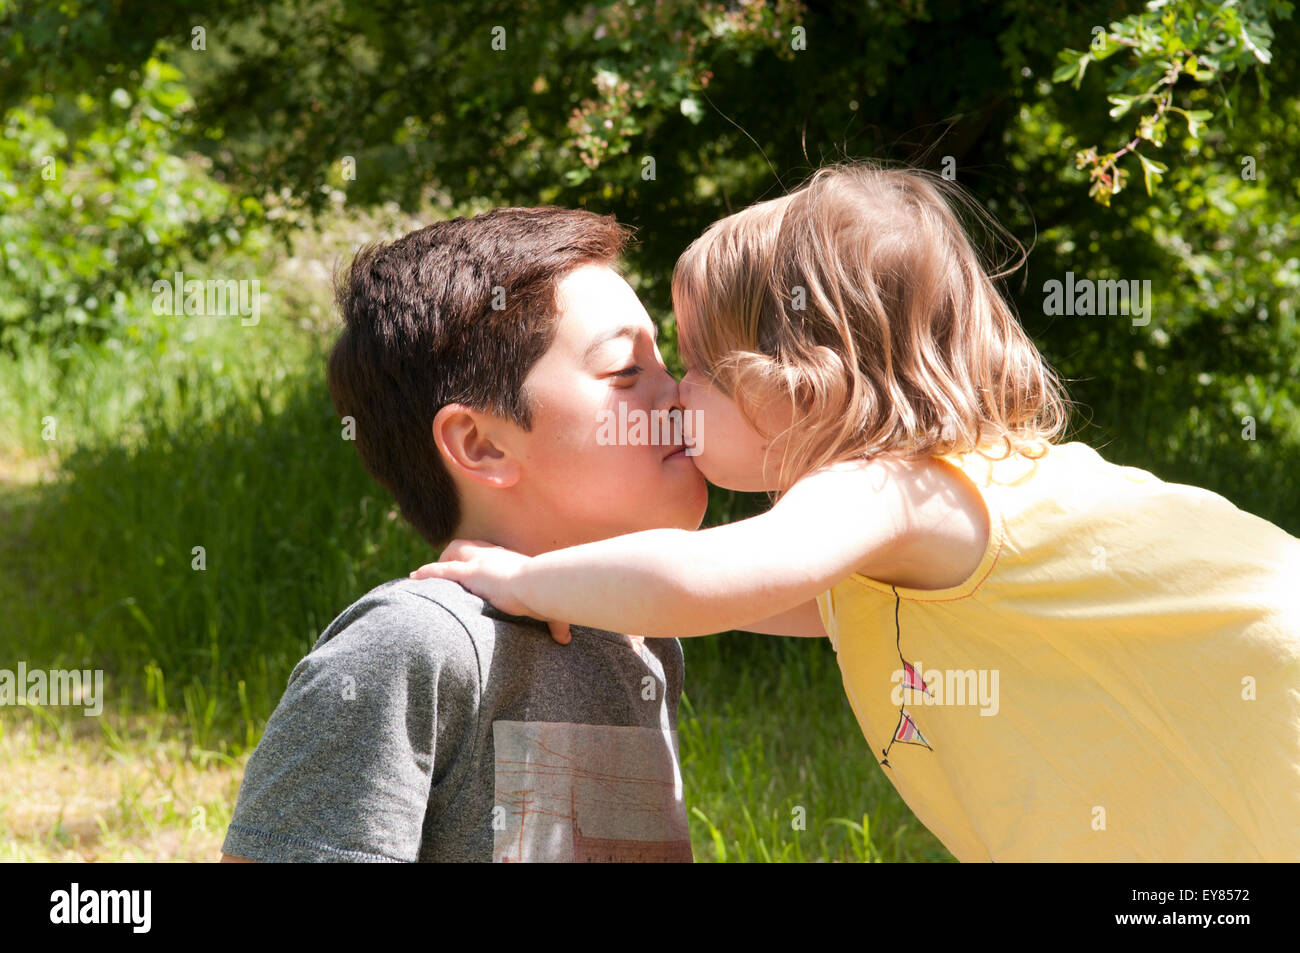 A Boy And A Girl Kissing